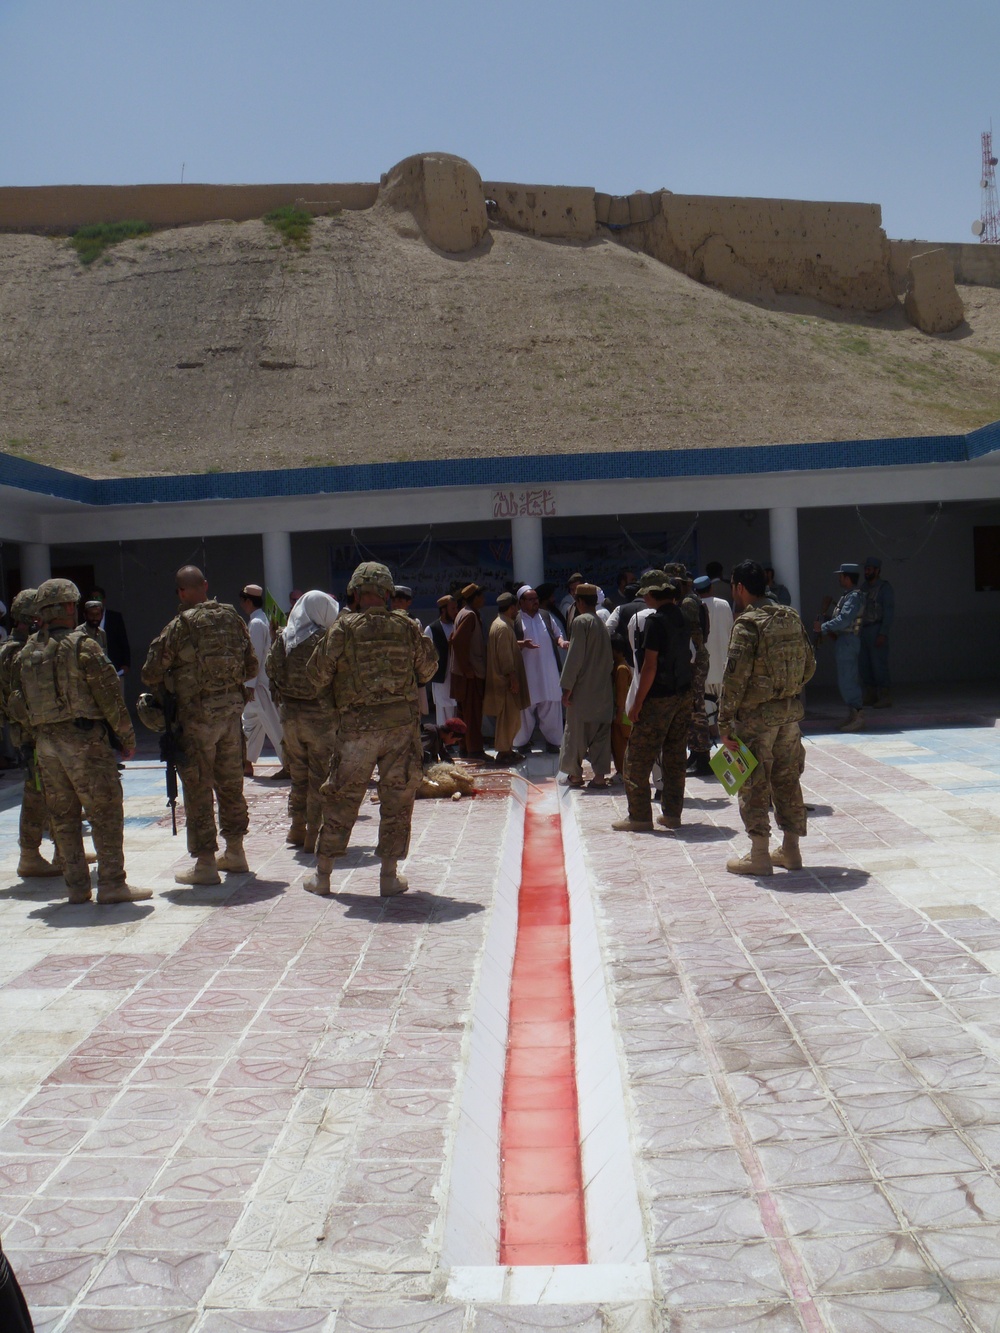 New Qalat slaughterhouse opens, marks first Afghan public-private partnership and new capacity for Afghan Government